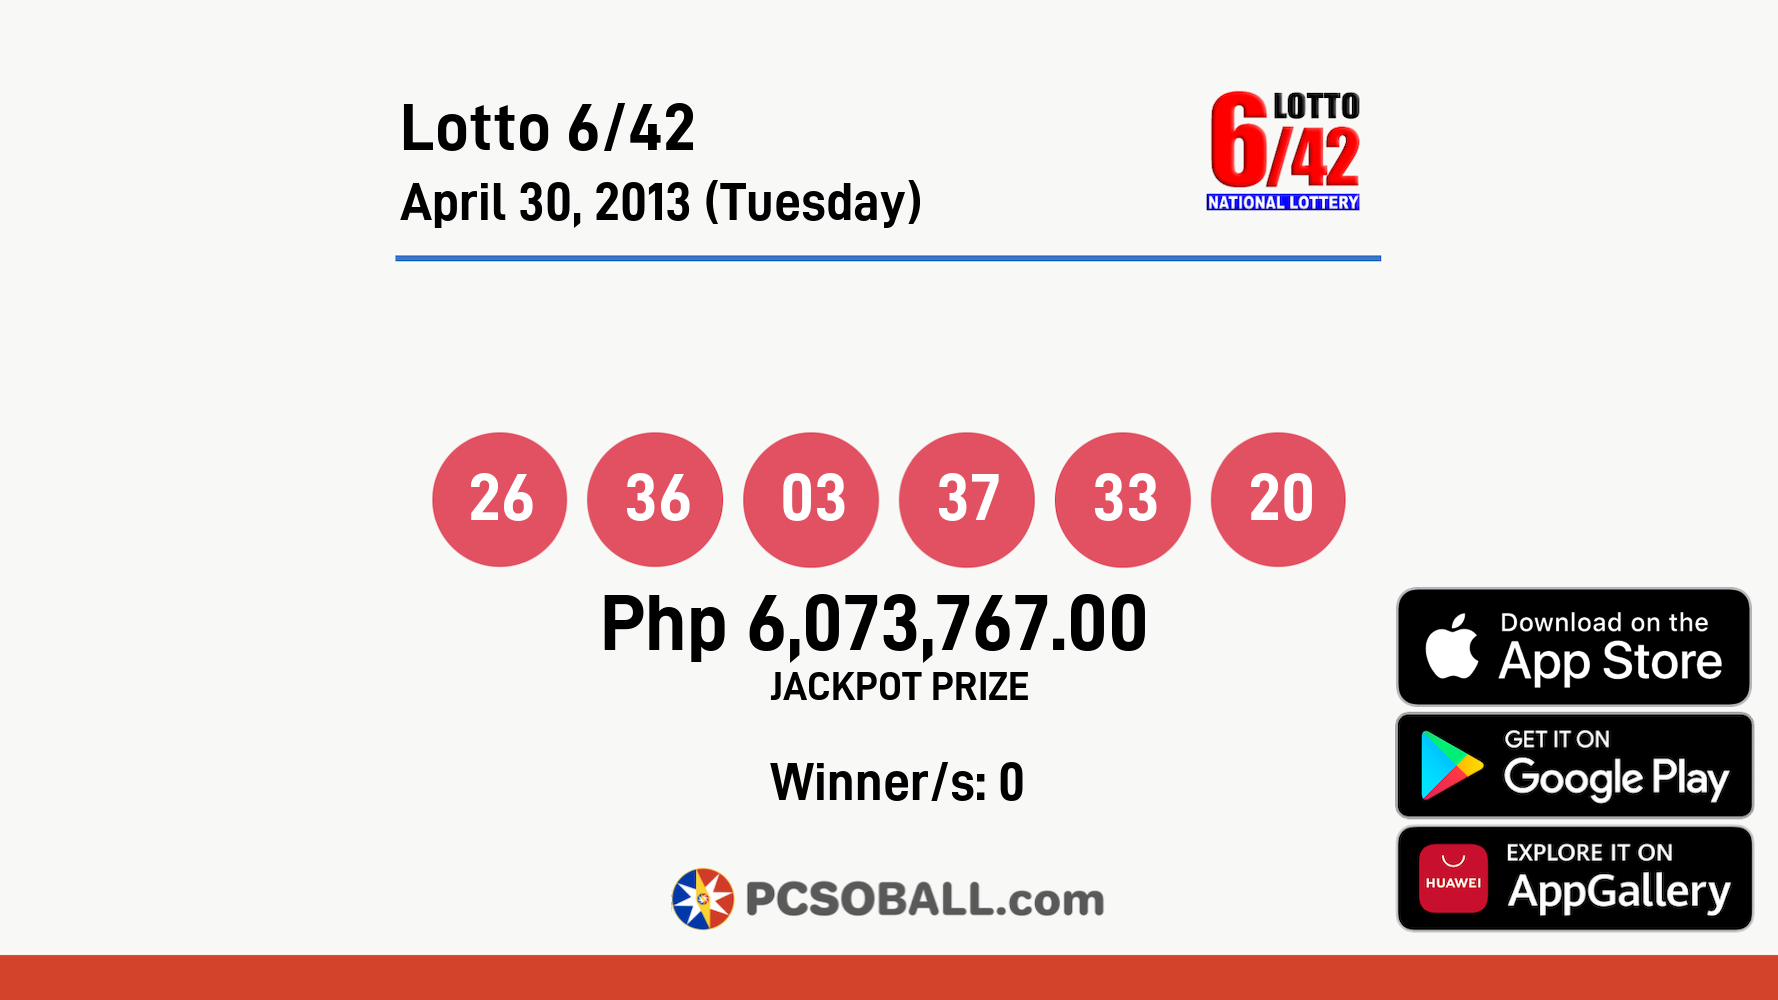 Lotto 6/42 April 30, 2013 (Tuesday) Result